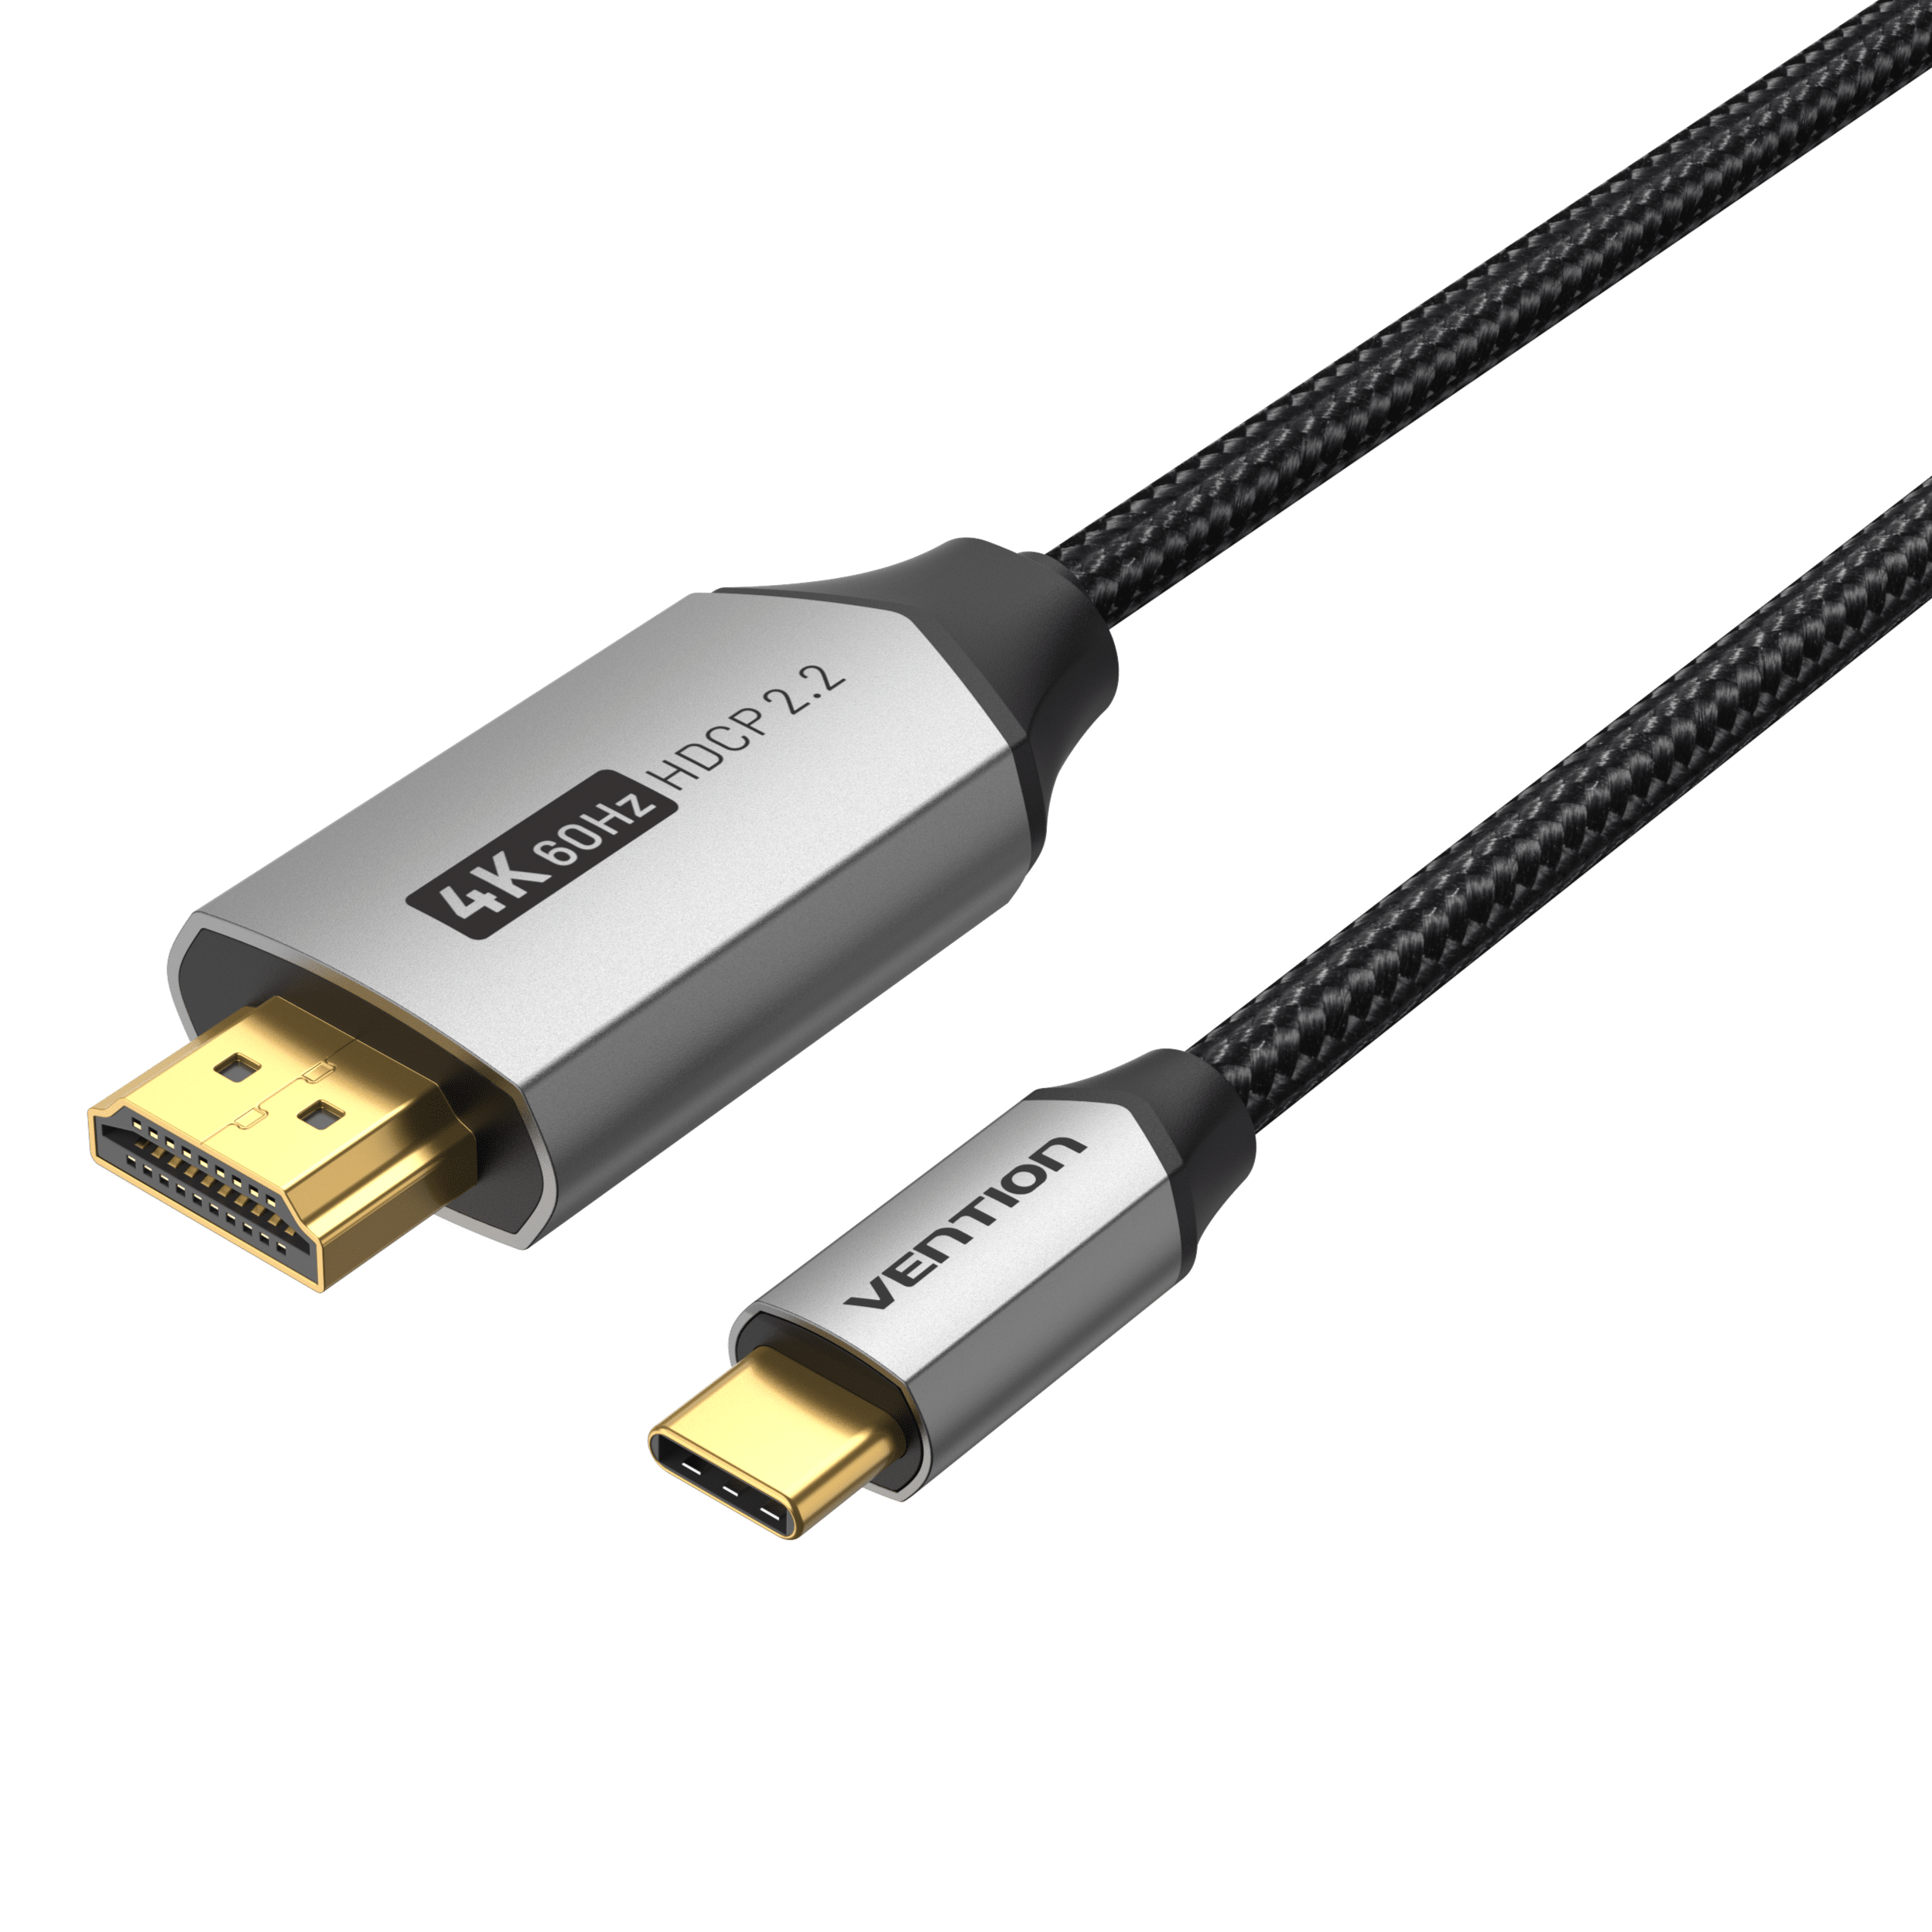 https://cdn.shopify.com/s/files/1/0610/7640/6438/products/vention-usb-c-to-4k-hdmi-cable-33607117013158.png?v=1681520376&width=2497